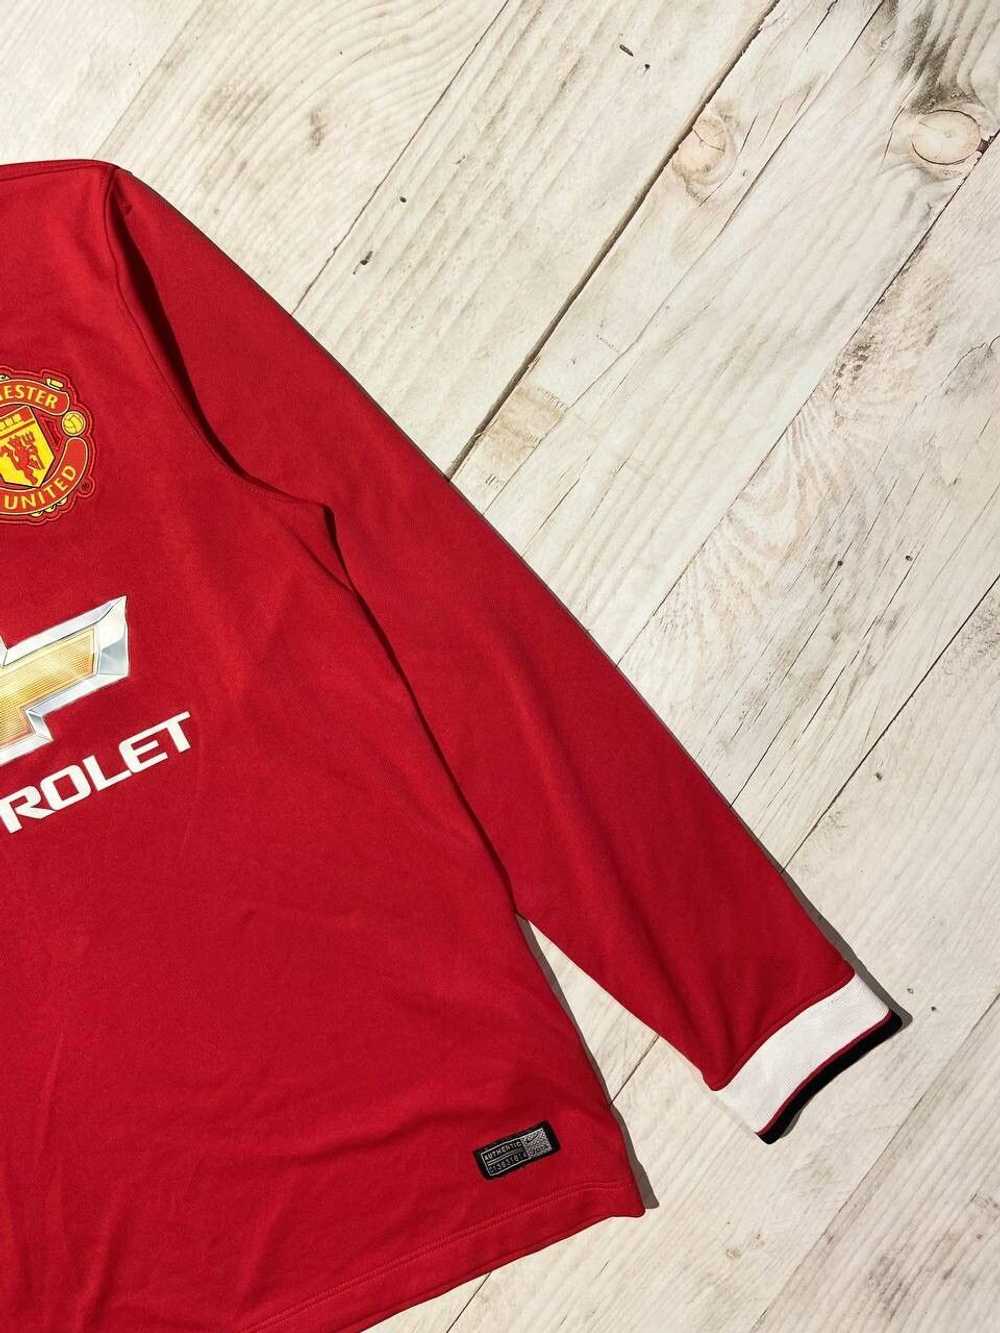 Manchester United × Nike × Soccer Jersey Manchest… - image 8